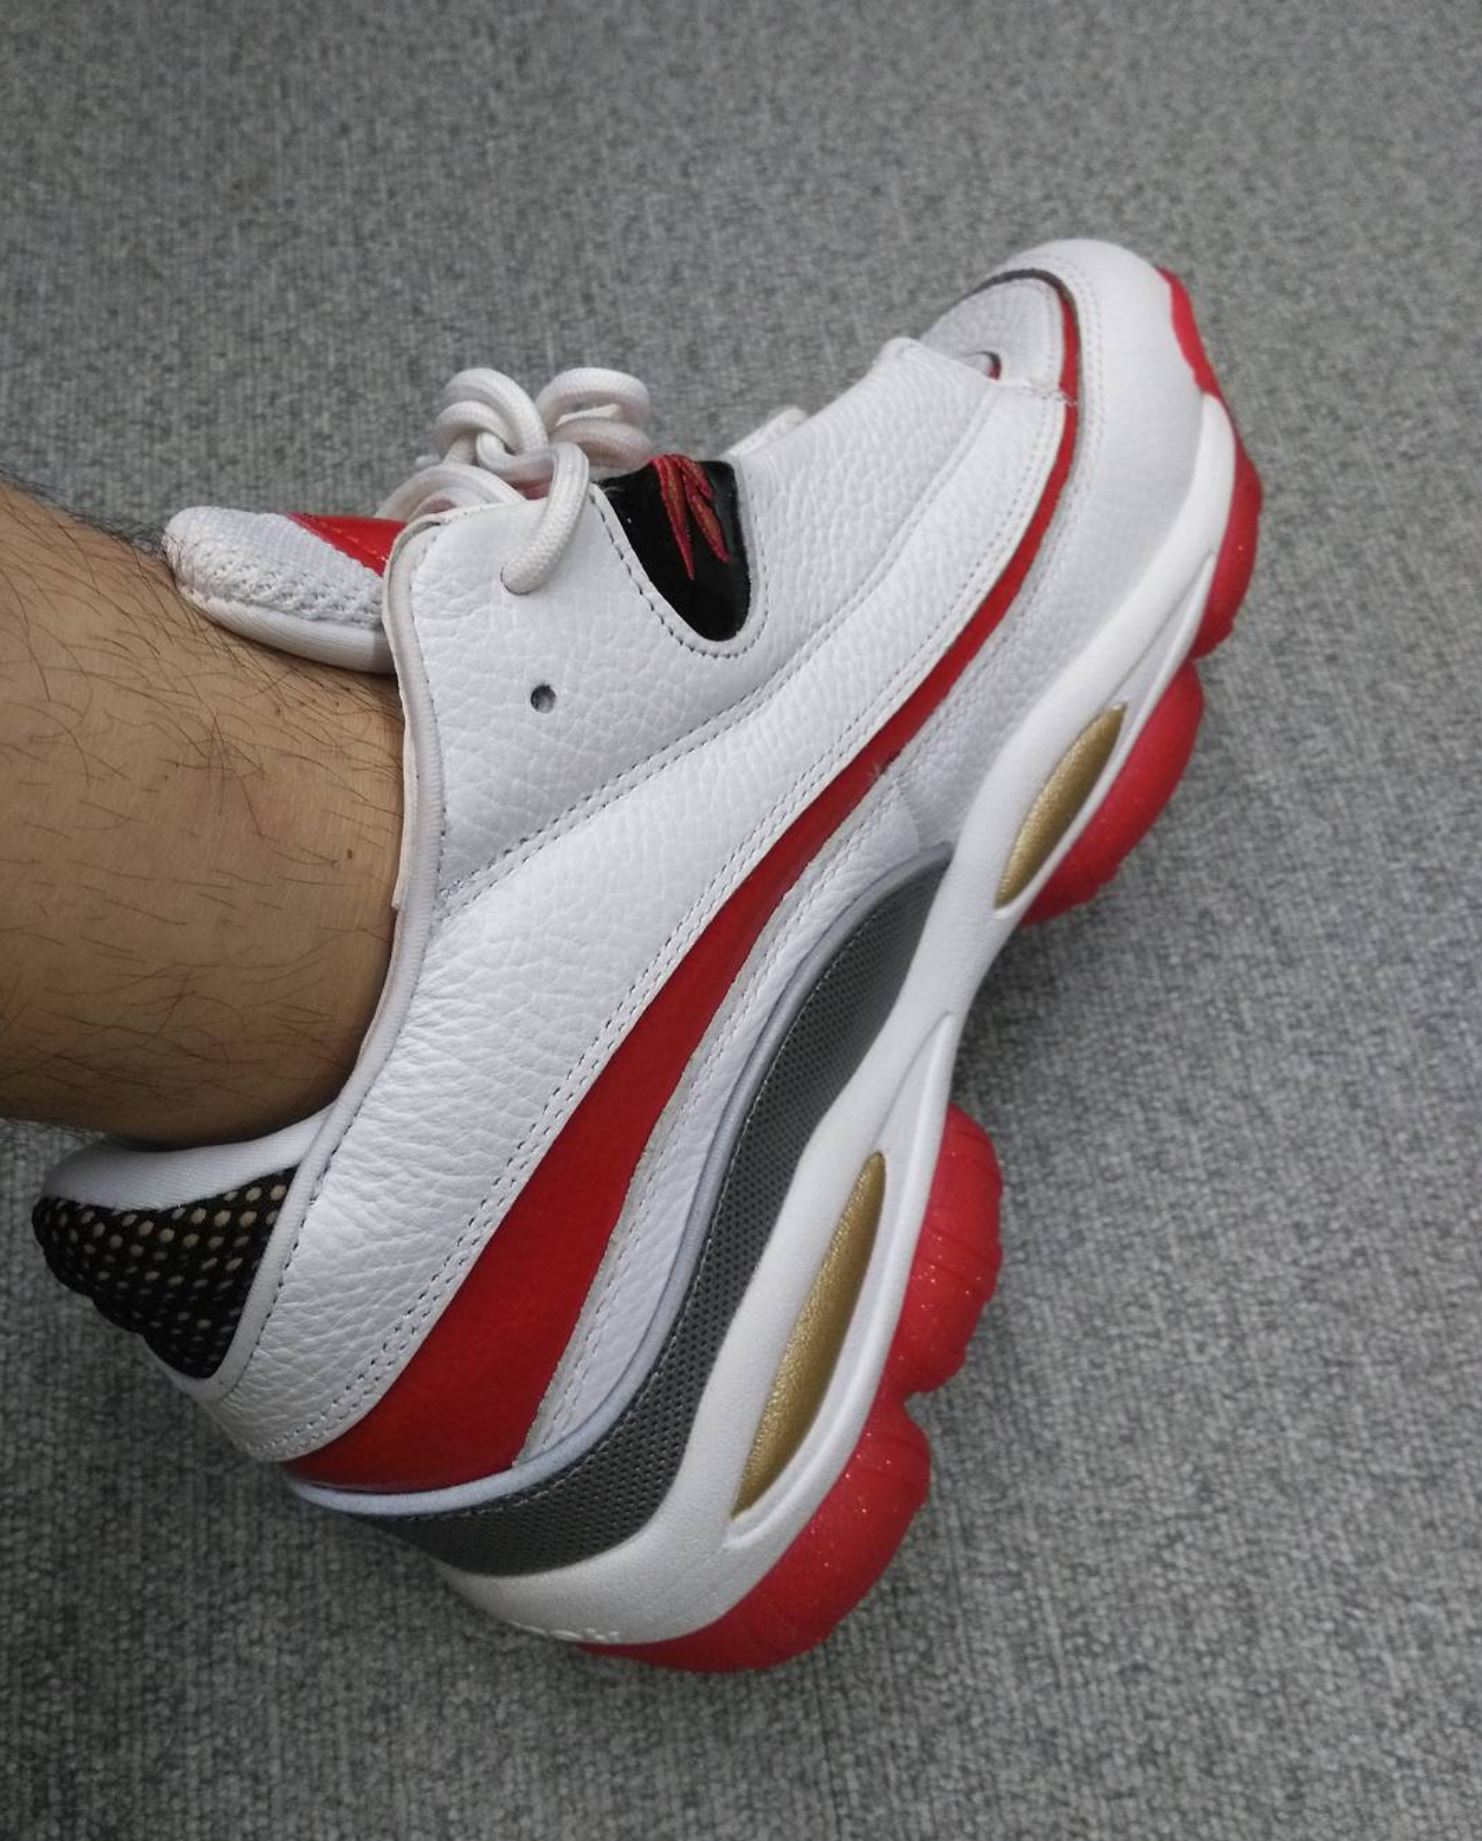 reebok answer 1 white red on foot